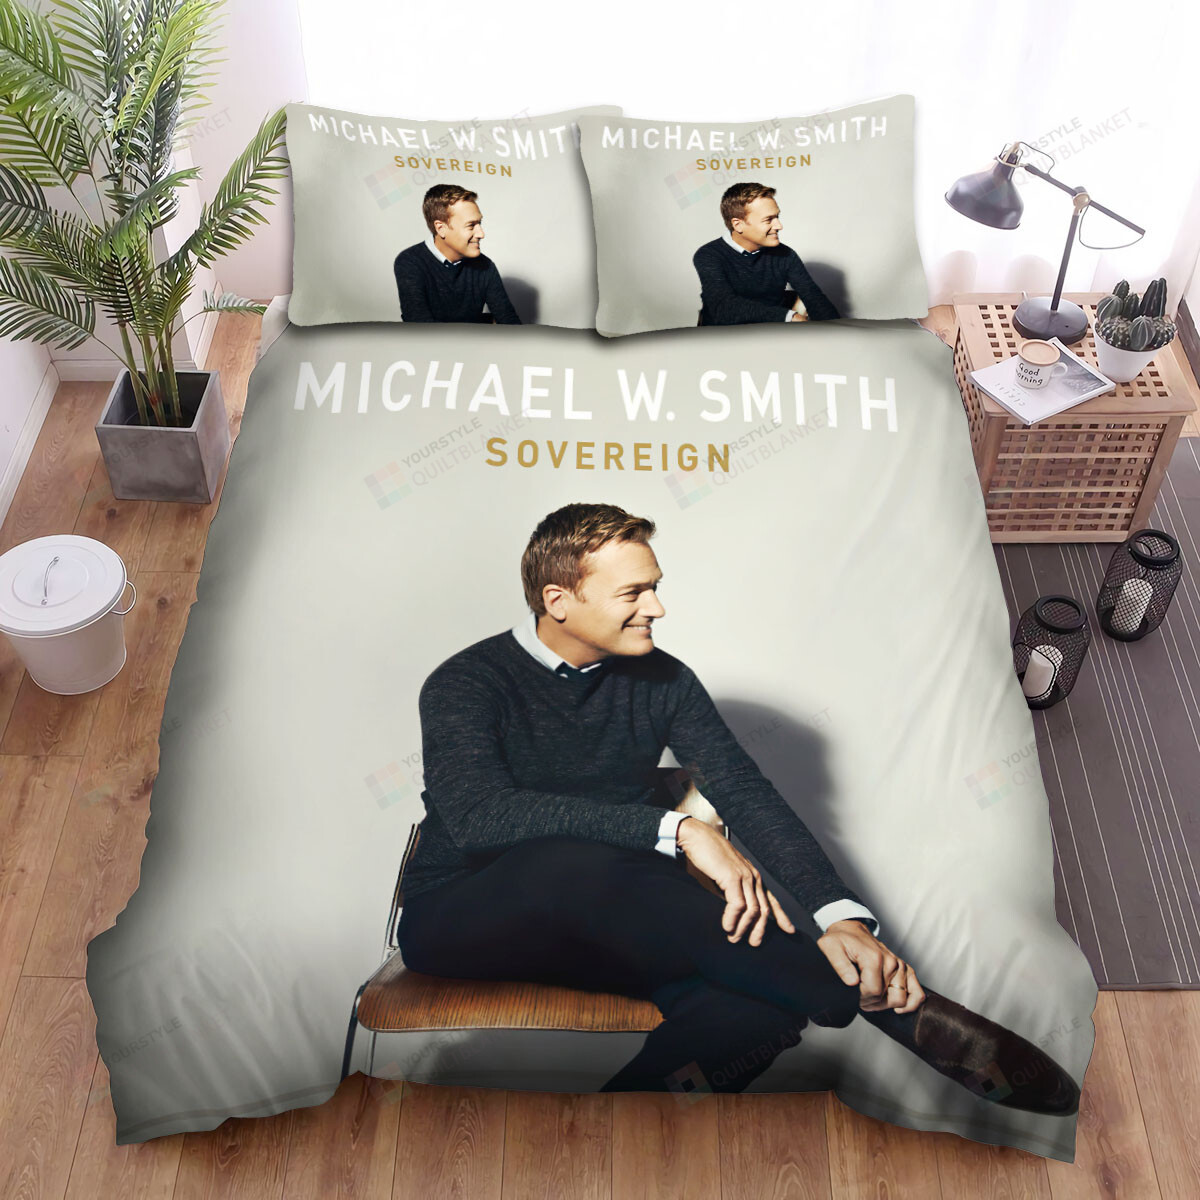 Michael W. Smith Sovereign Bed Sheets Spread Comforter Duvet Cover Bedding Sets